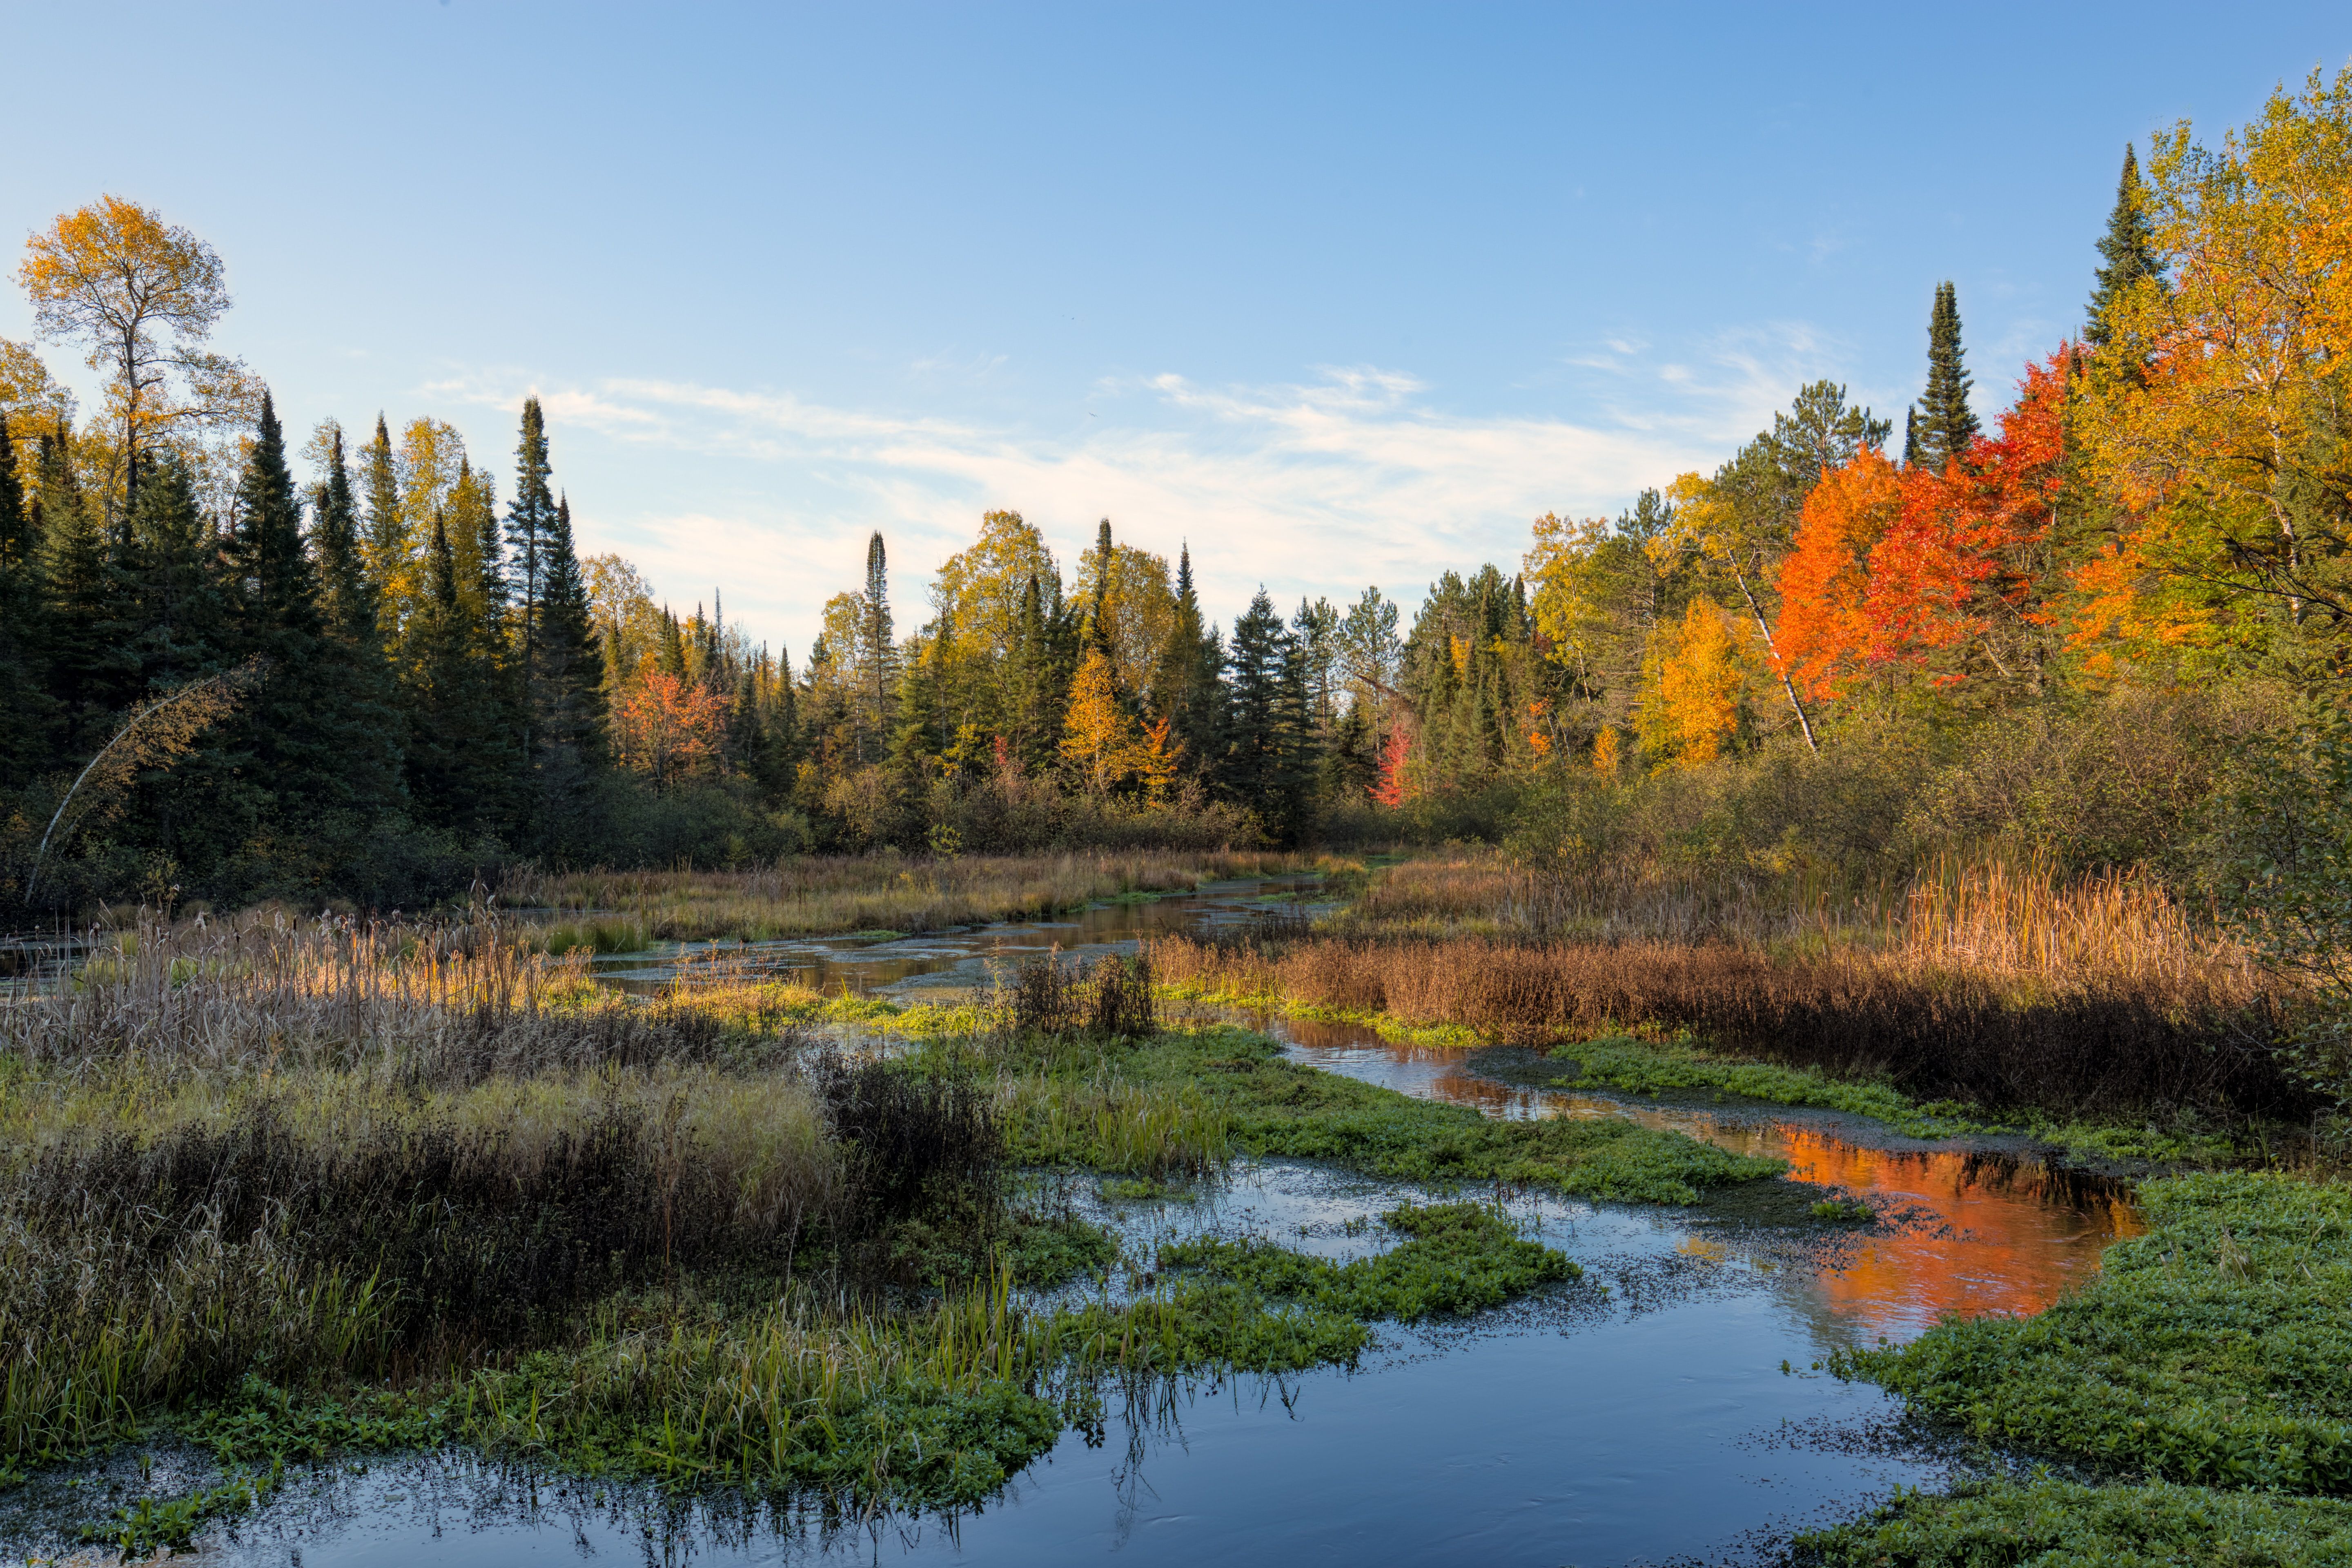 An image of a Wisconsin marsh surrounded by woods in autumn. The colors include a blue stream, green ground-cover and aquatic plant life, and orange, yellow, green and gold foliage on the trees.